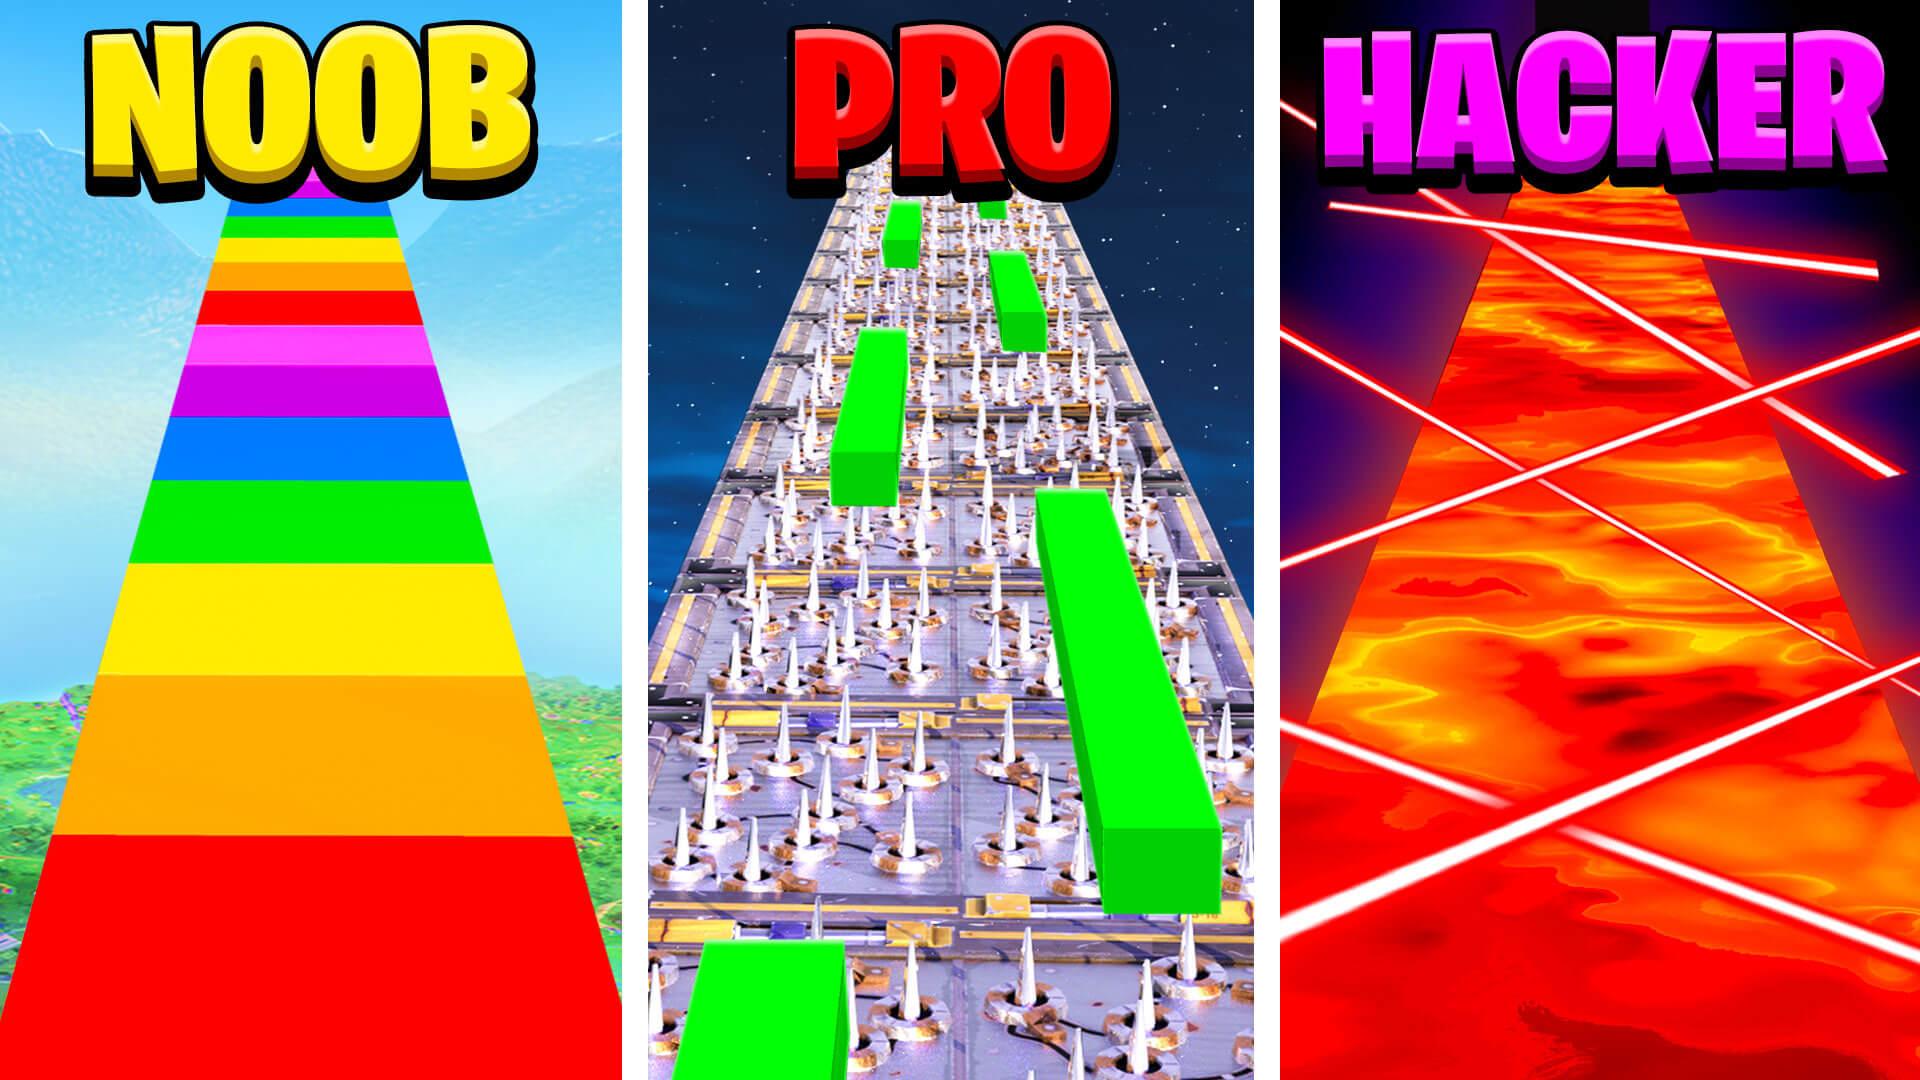 More Maps By Tbnrfrags Vs Pro, HD Wallpaper